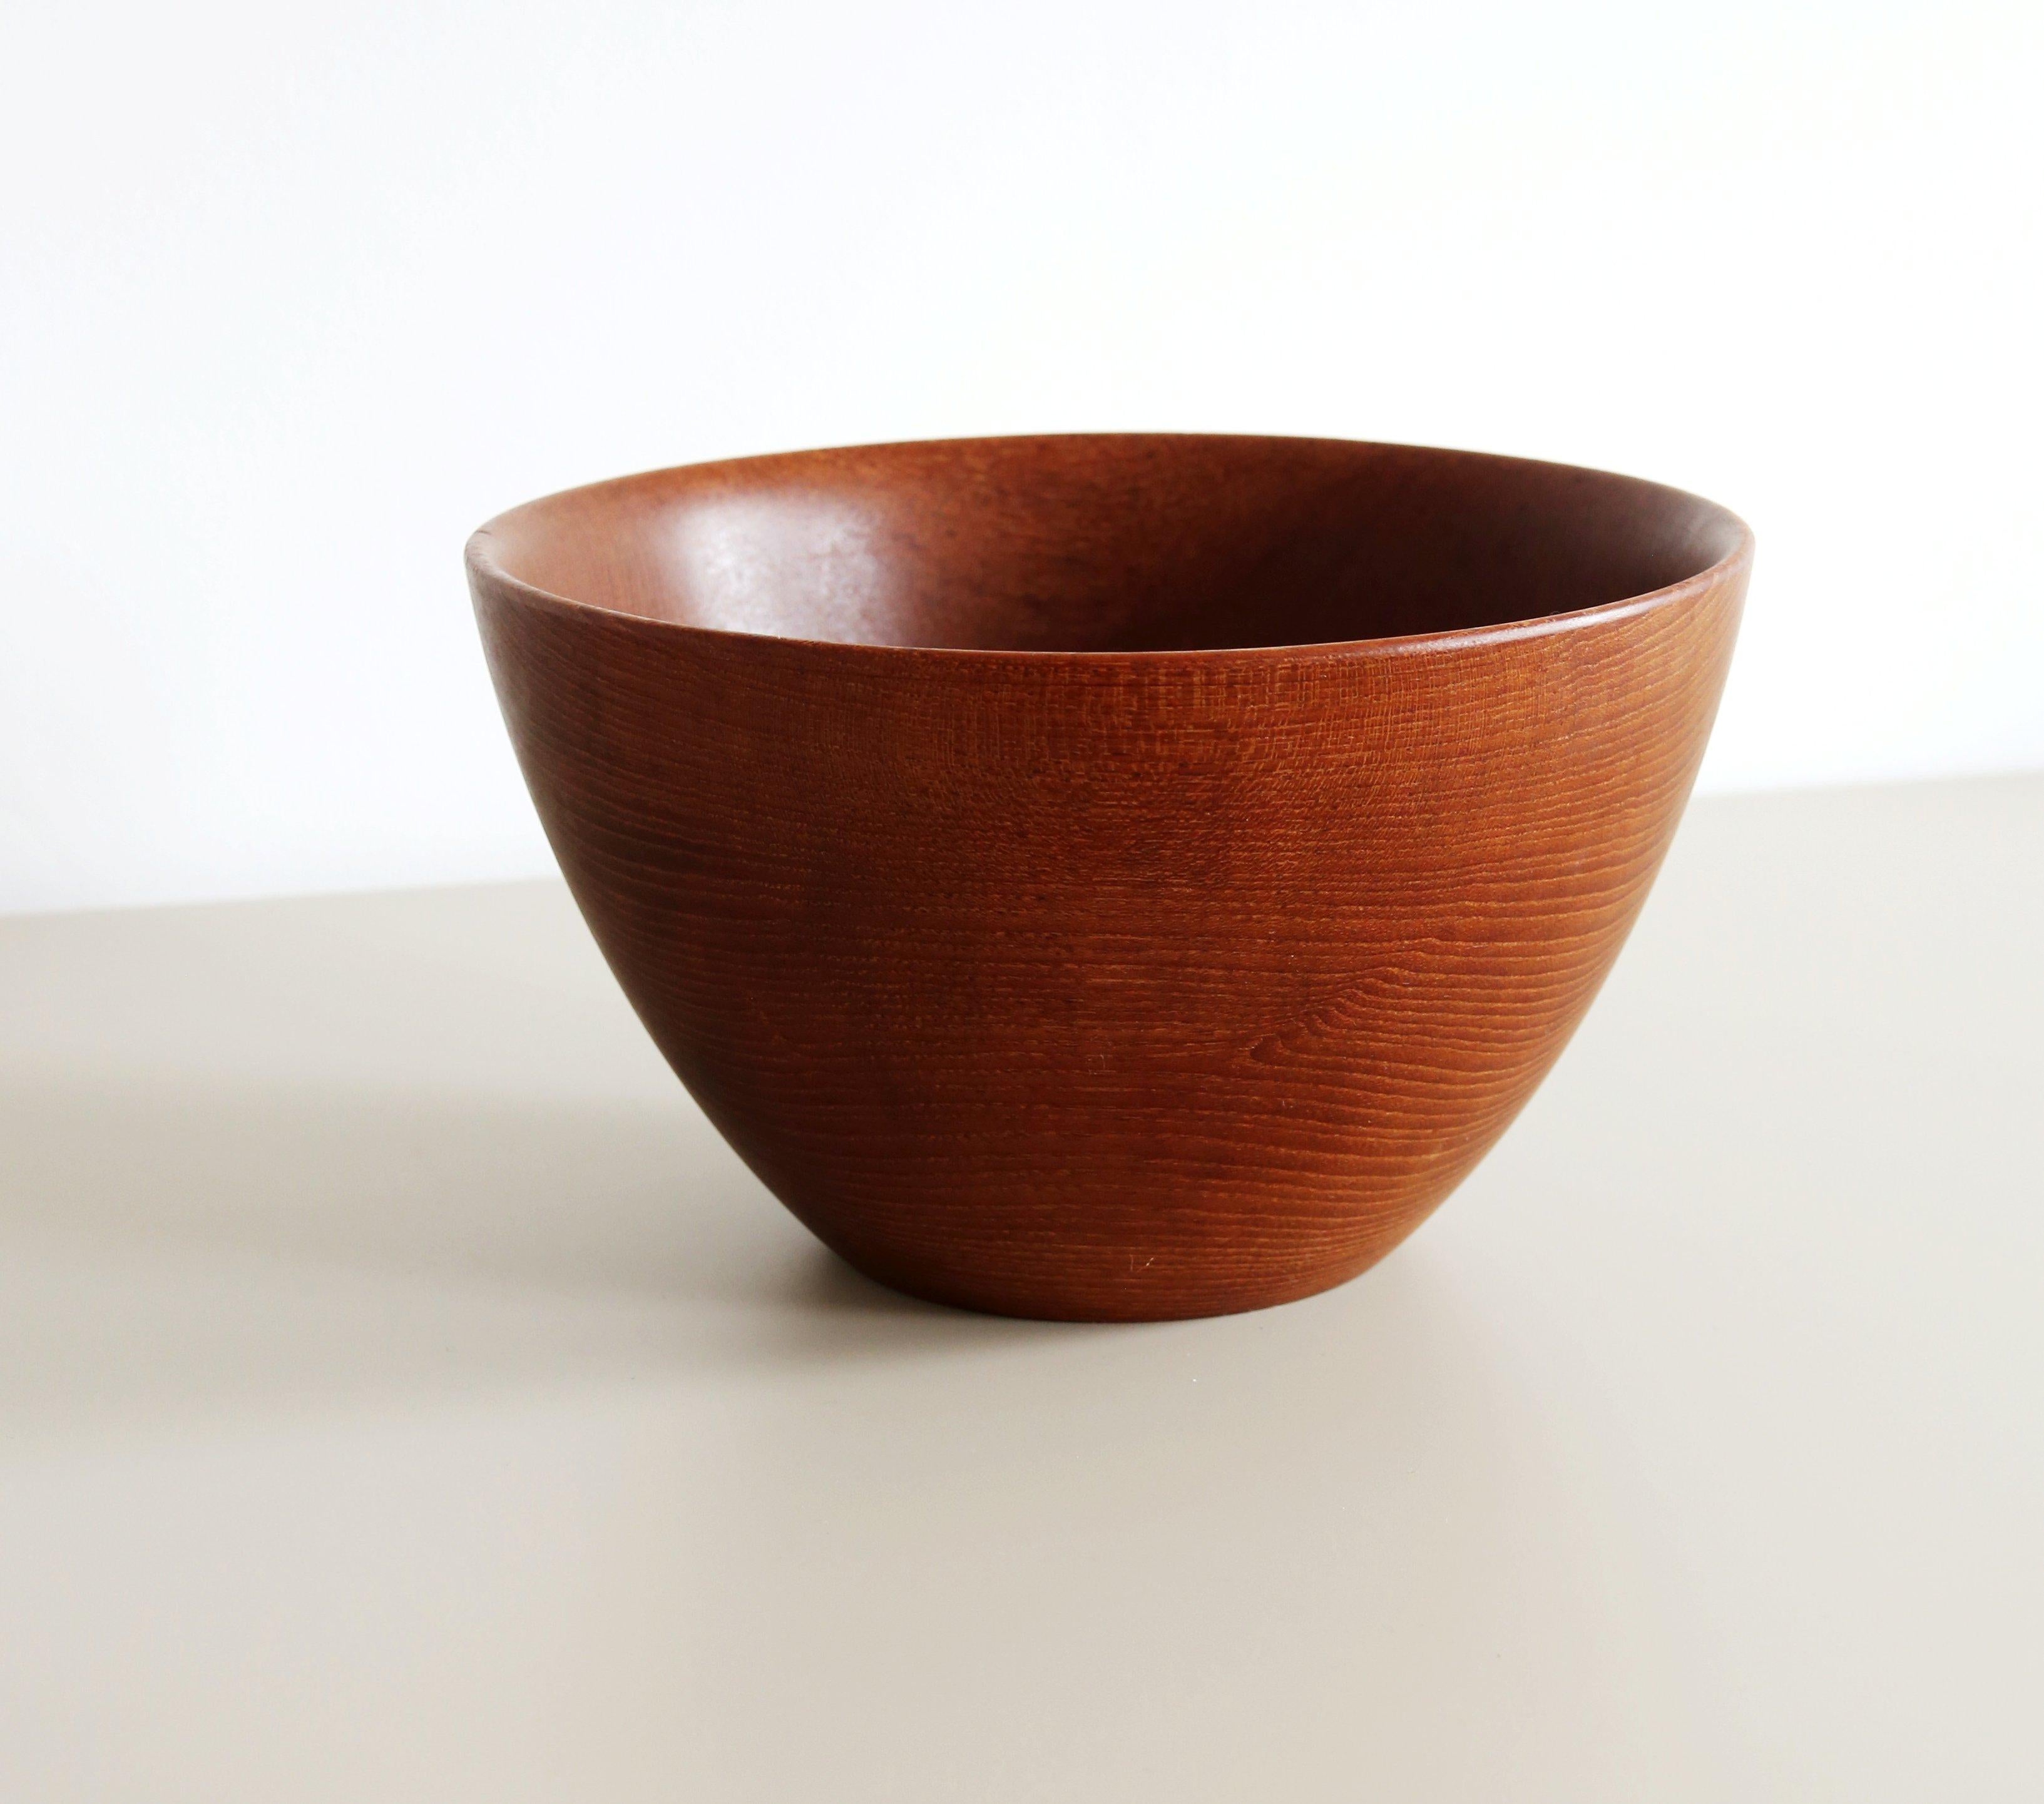 Mid Century teak bowl by Galatix hand made in England from Burmese teak

Lovely large wooden bowl with a beautiful grain and patina in lovely vintage condition for a useful and practical item that is over 50 years old, it dates from the